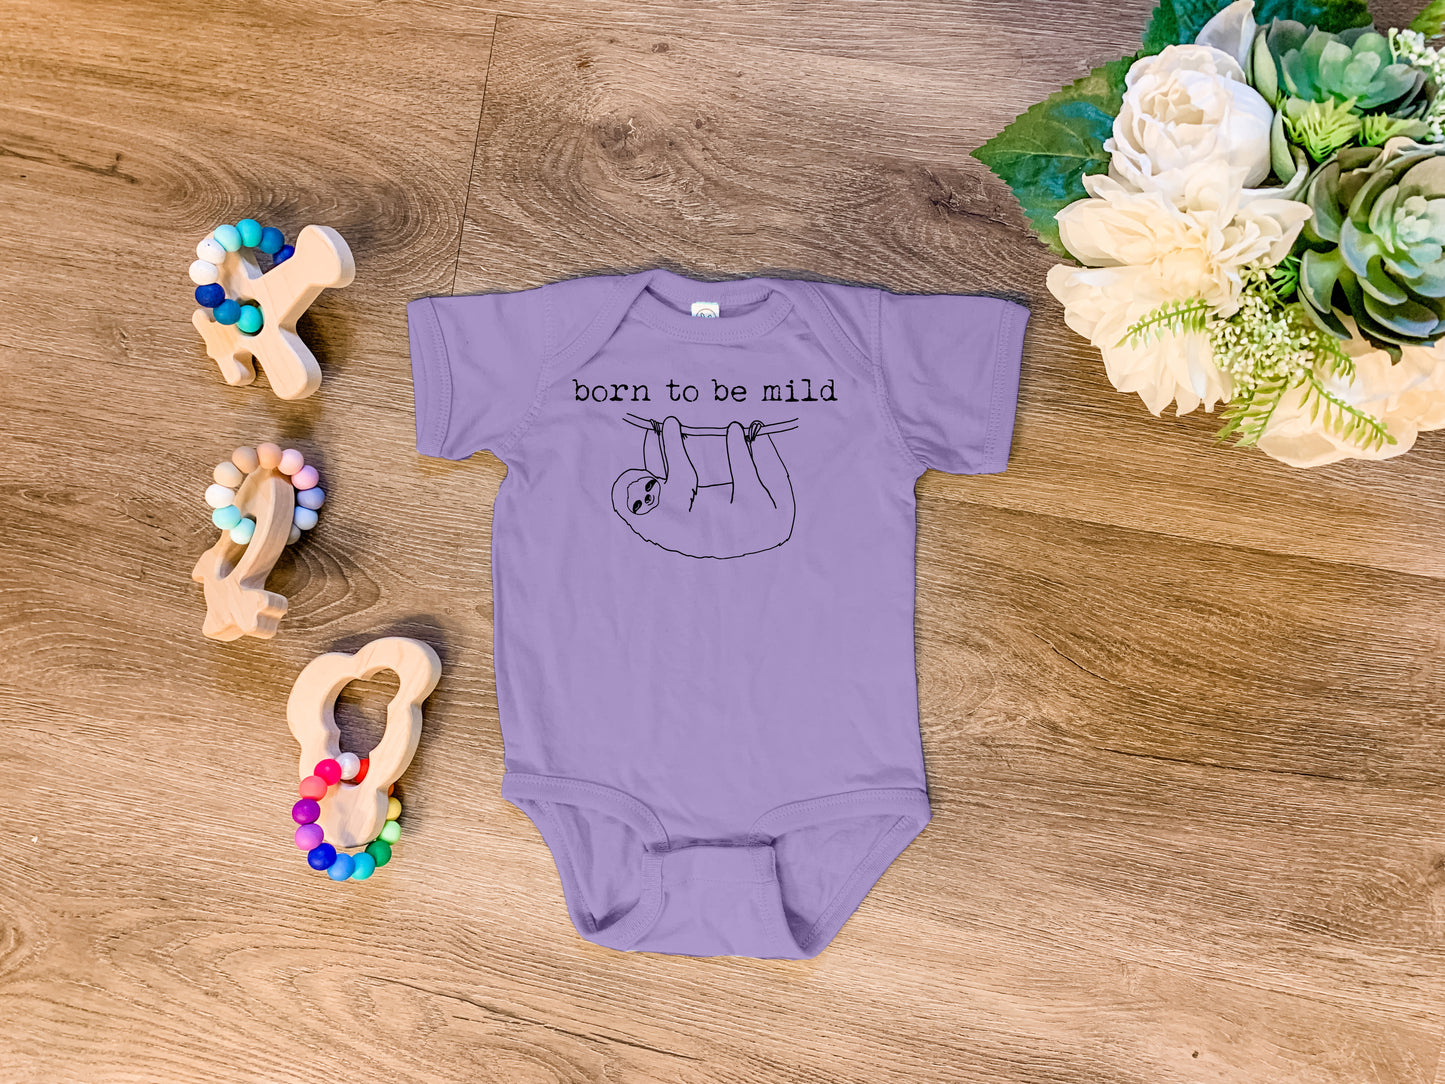 Born To Be Mild (Sloth) - Onesie - Heather Gray, Chill, or Lavender